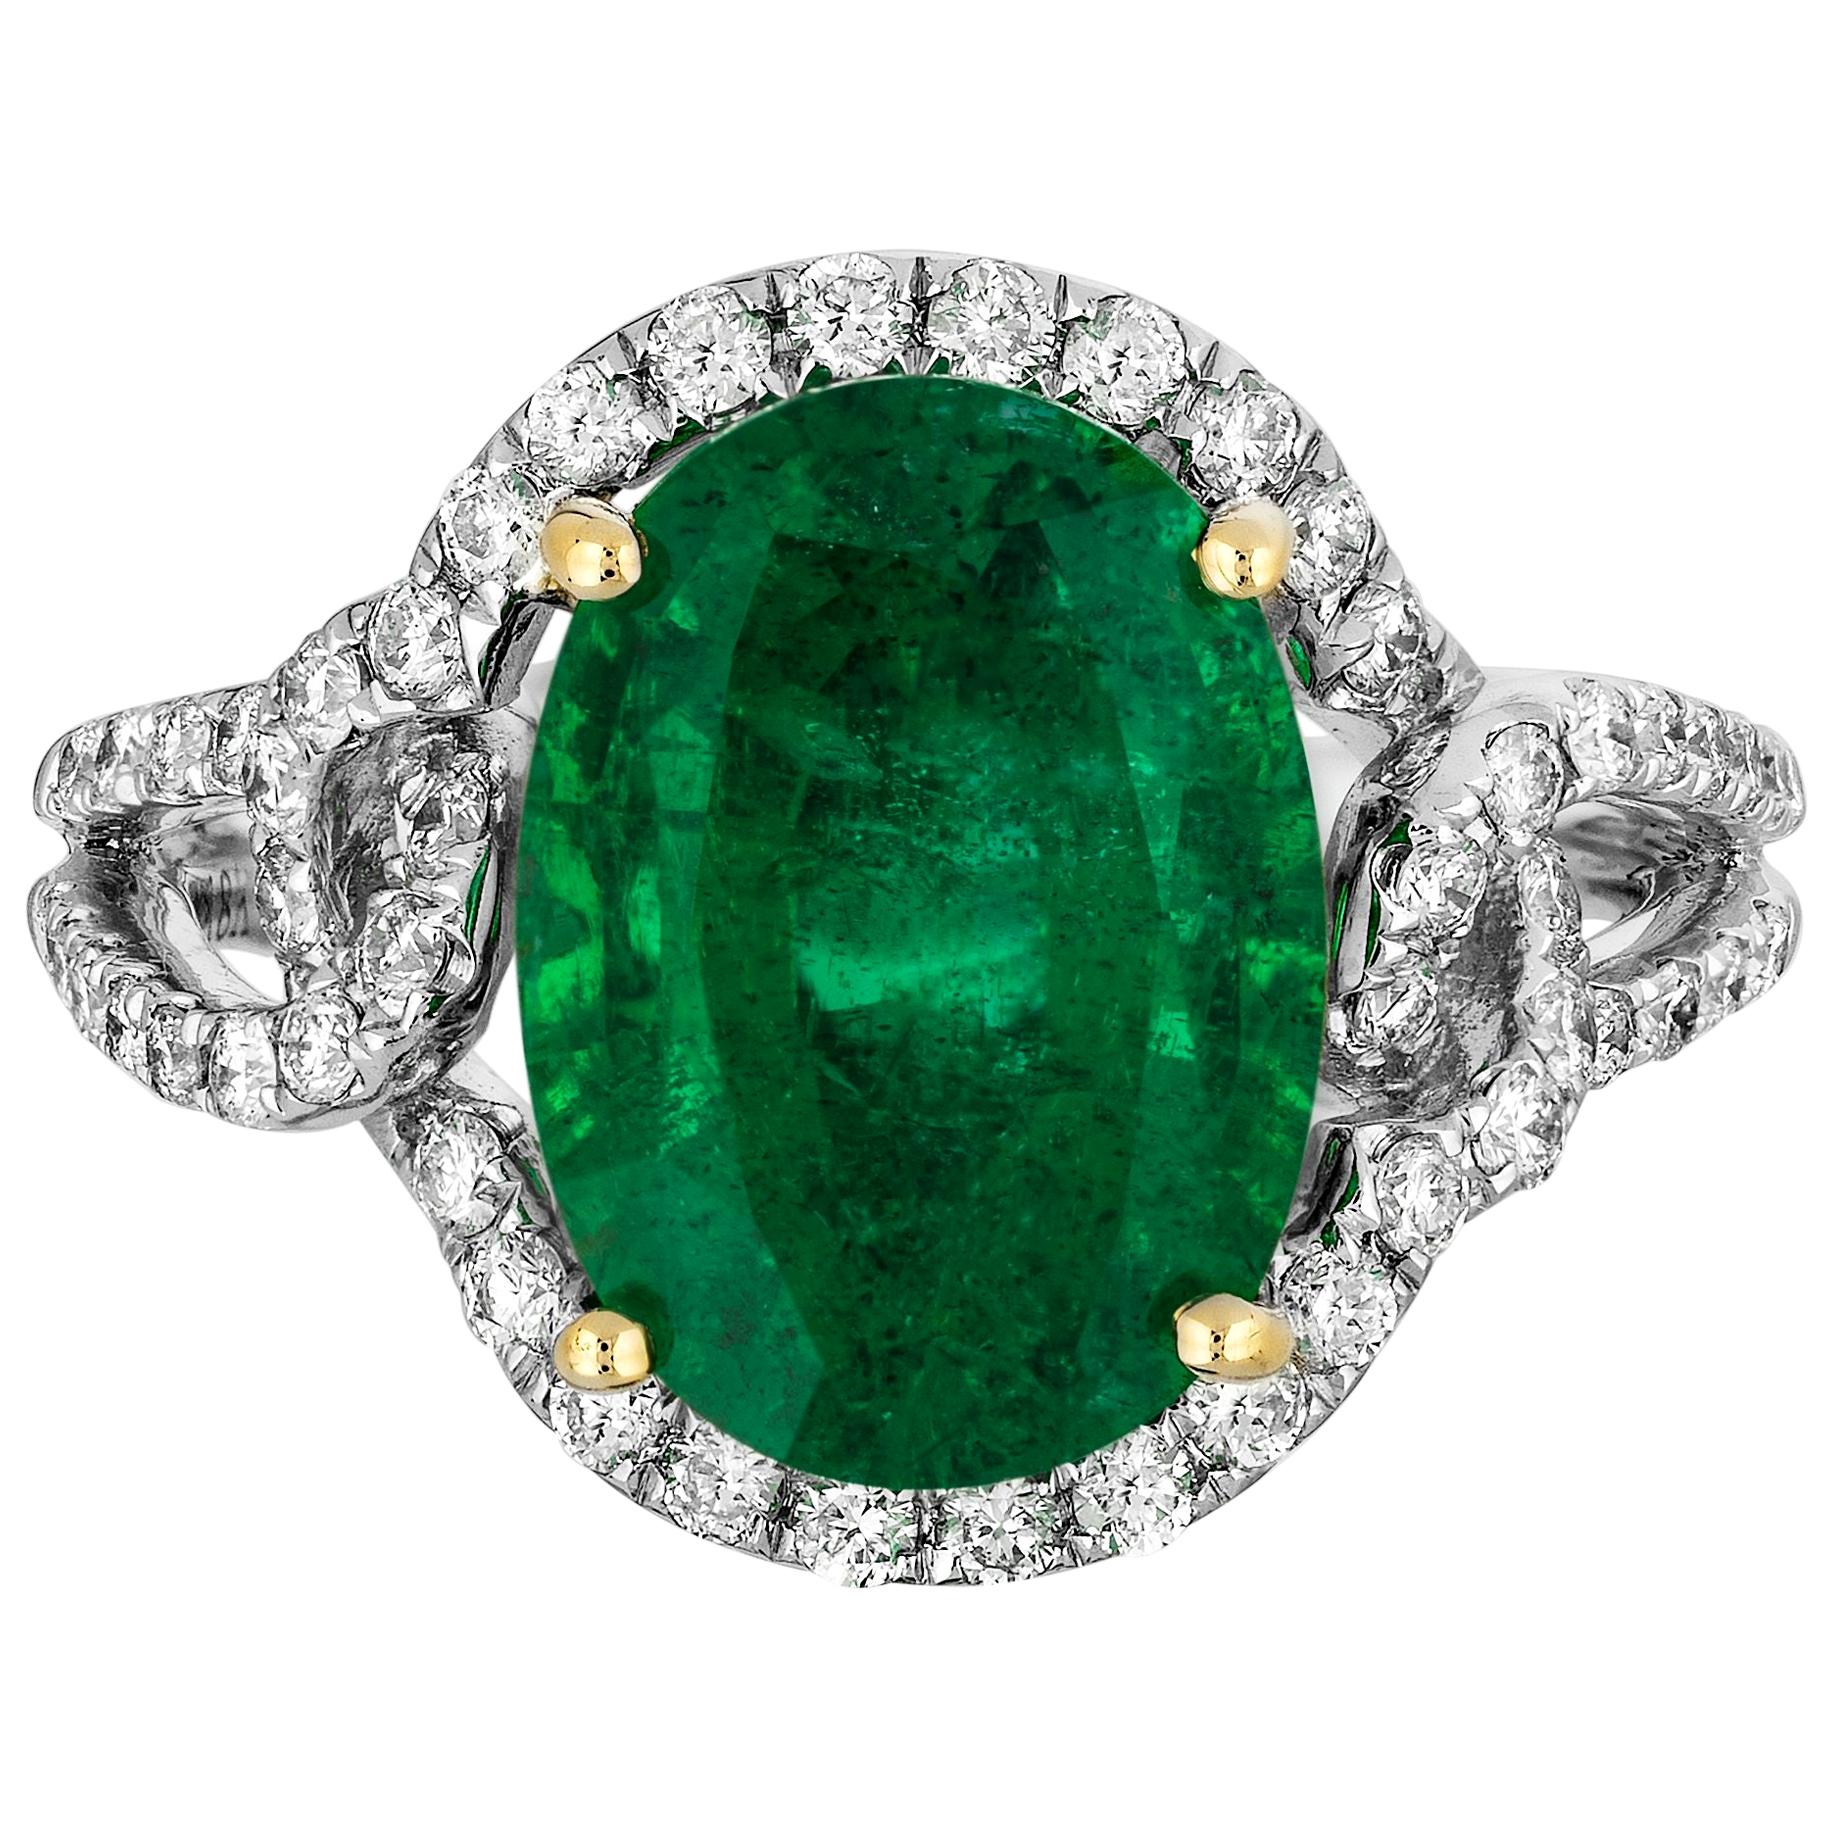 4.73 Carat Emerald Diamond Cocktail Ring For Sale